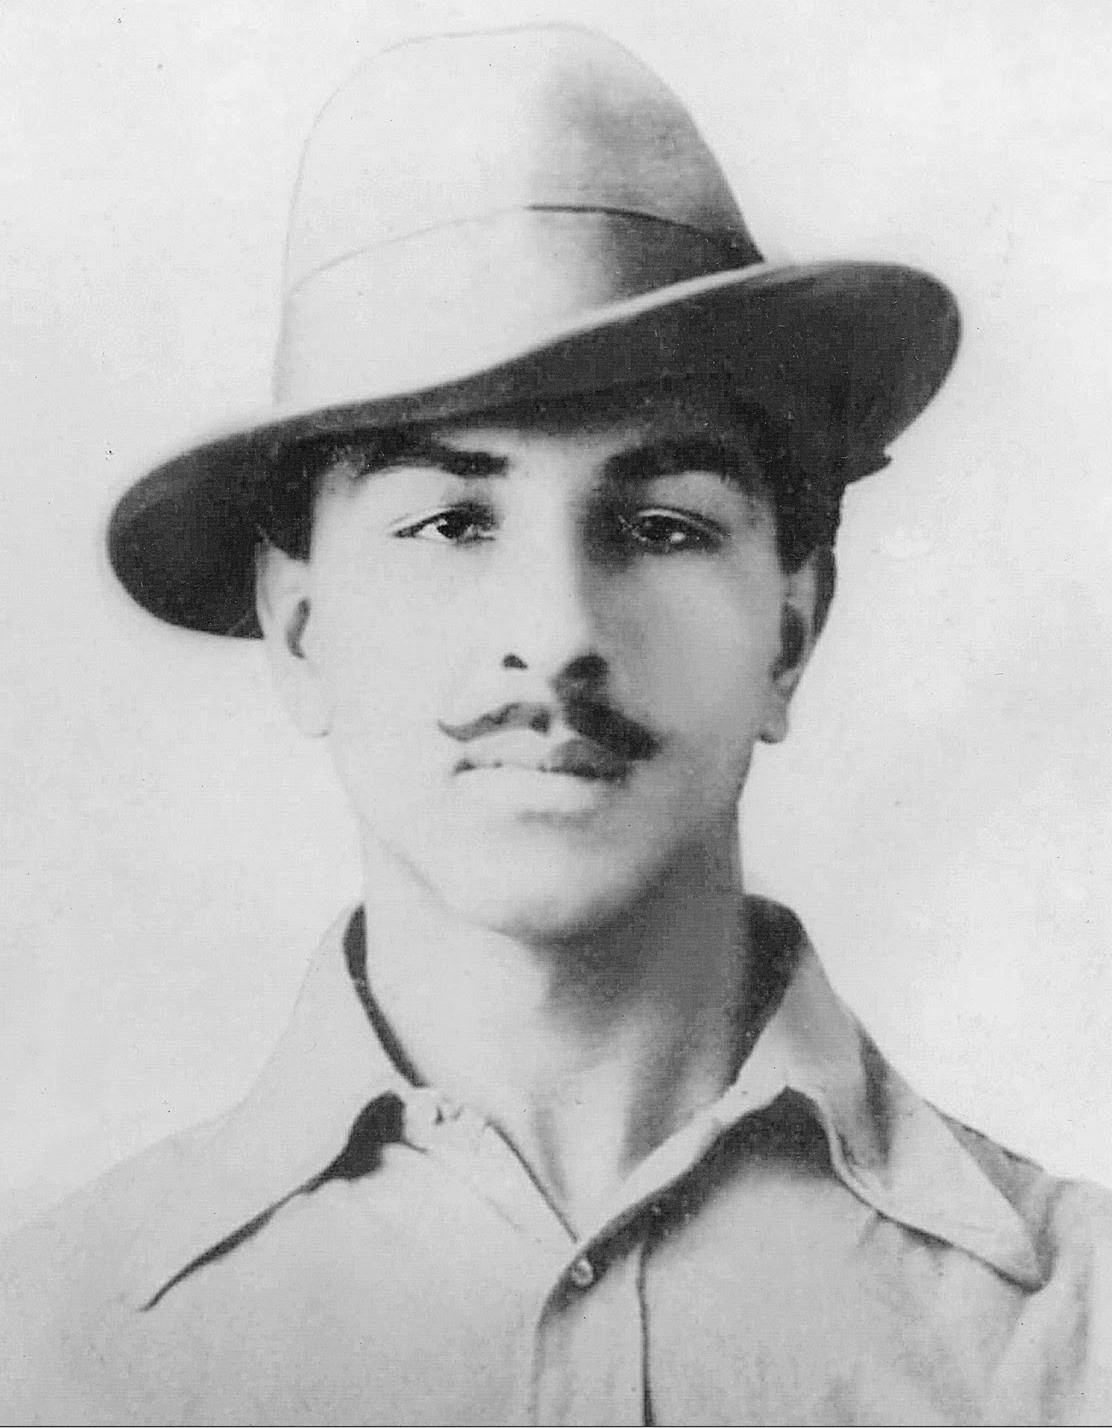 Bhagat Singh (Indian revolutionary) - Age, Height, Net Worth, Biography